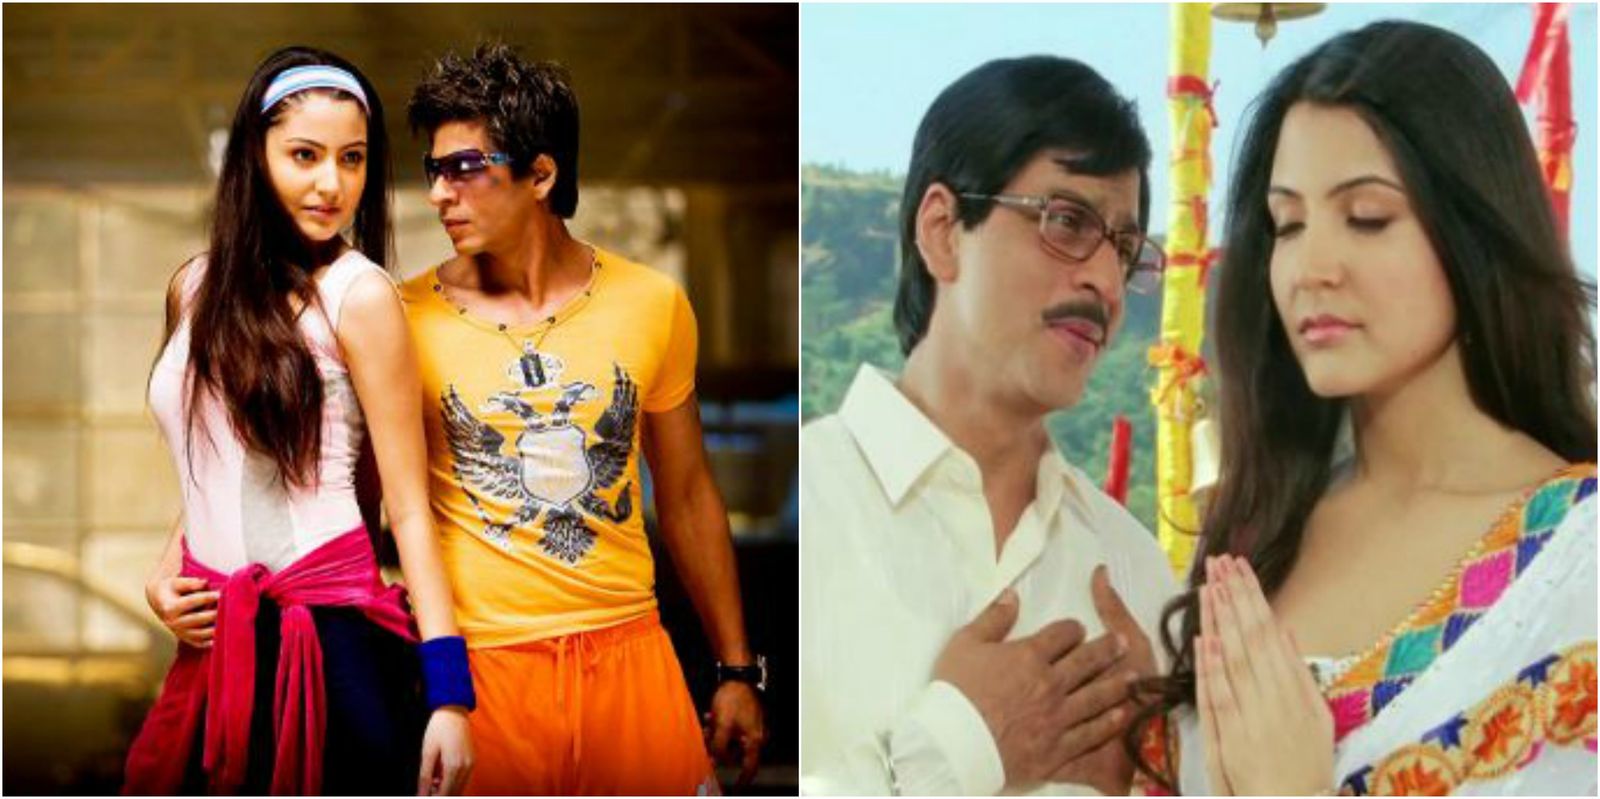 Did You Know That Chance Pe Dance From Rab Ne Bana Di Jodi Has Inspired Two Major International Hits? Find Out!